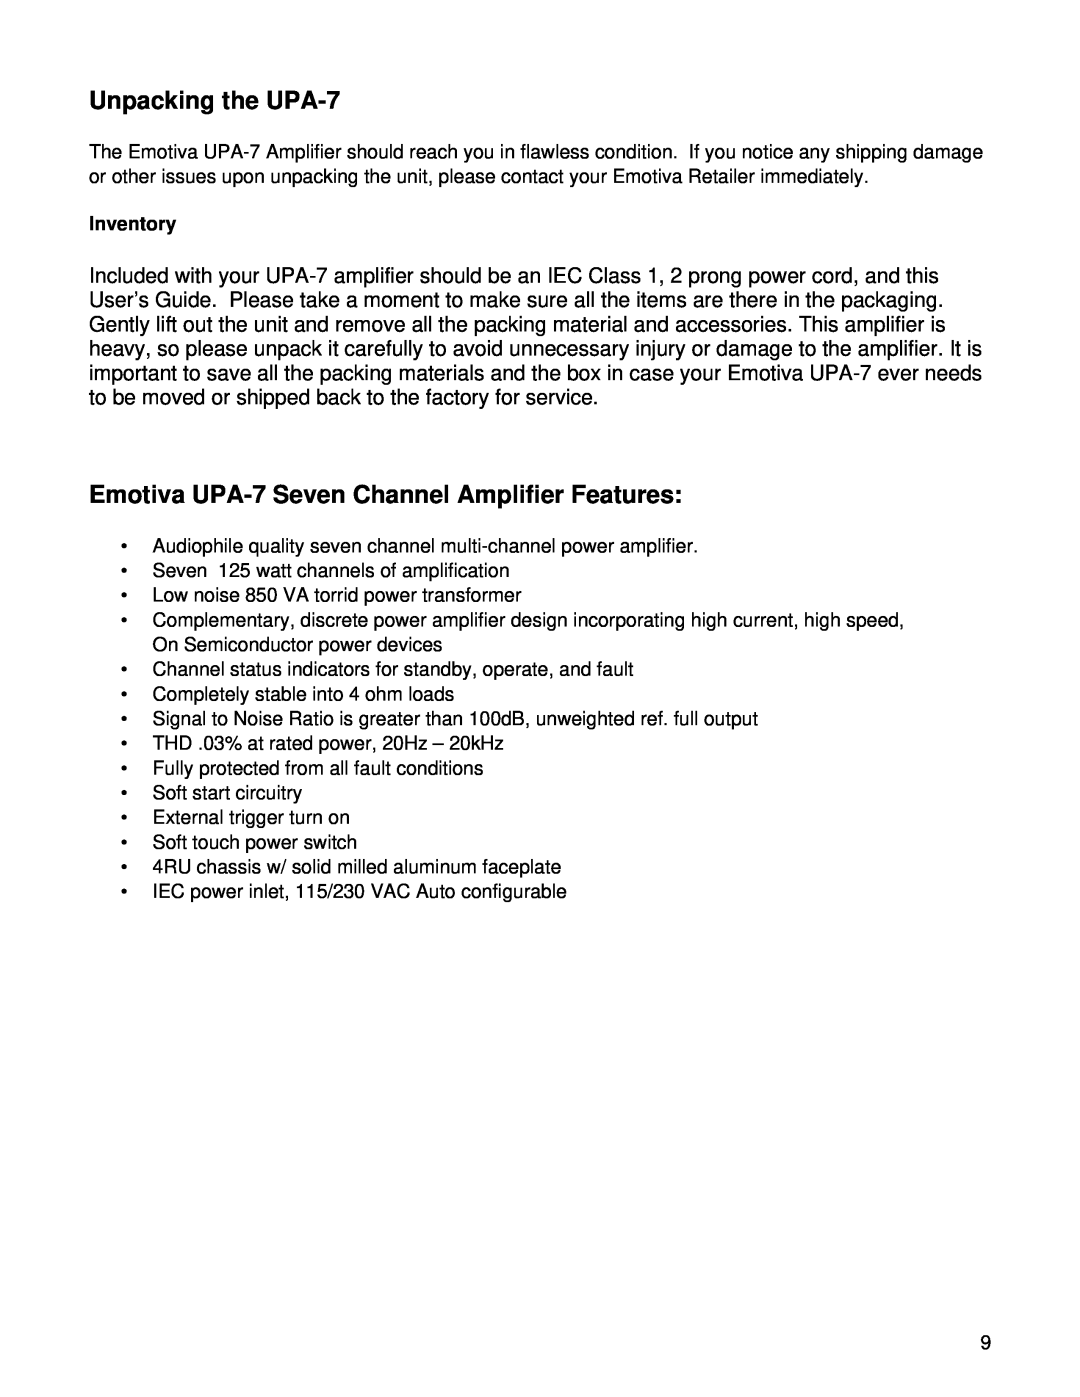 Emotiva manual Unpacking the UPA-7, Emotiva UPA-7Seven Channel Amplifier Features, Inventory 